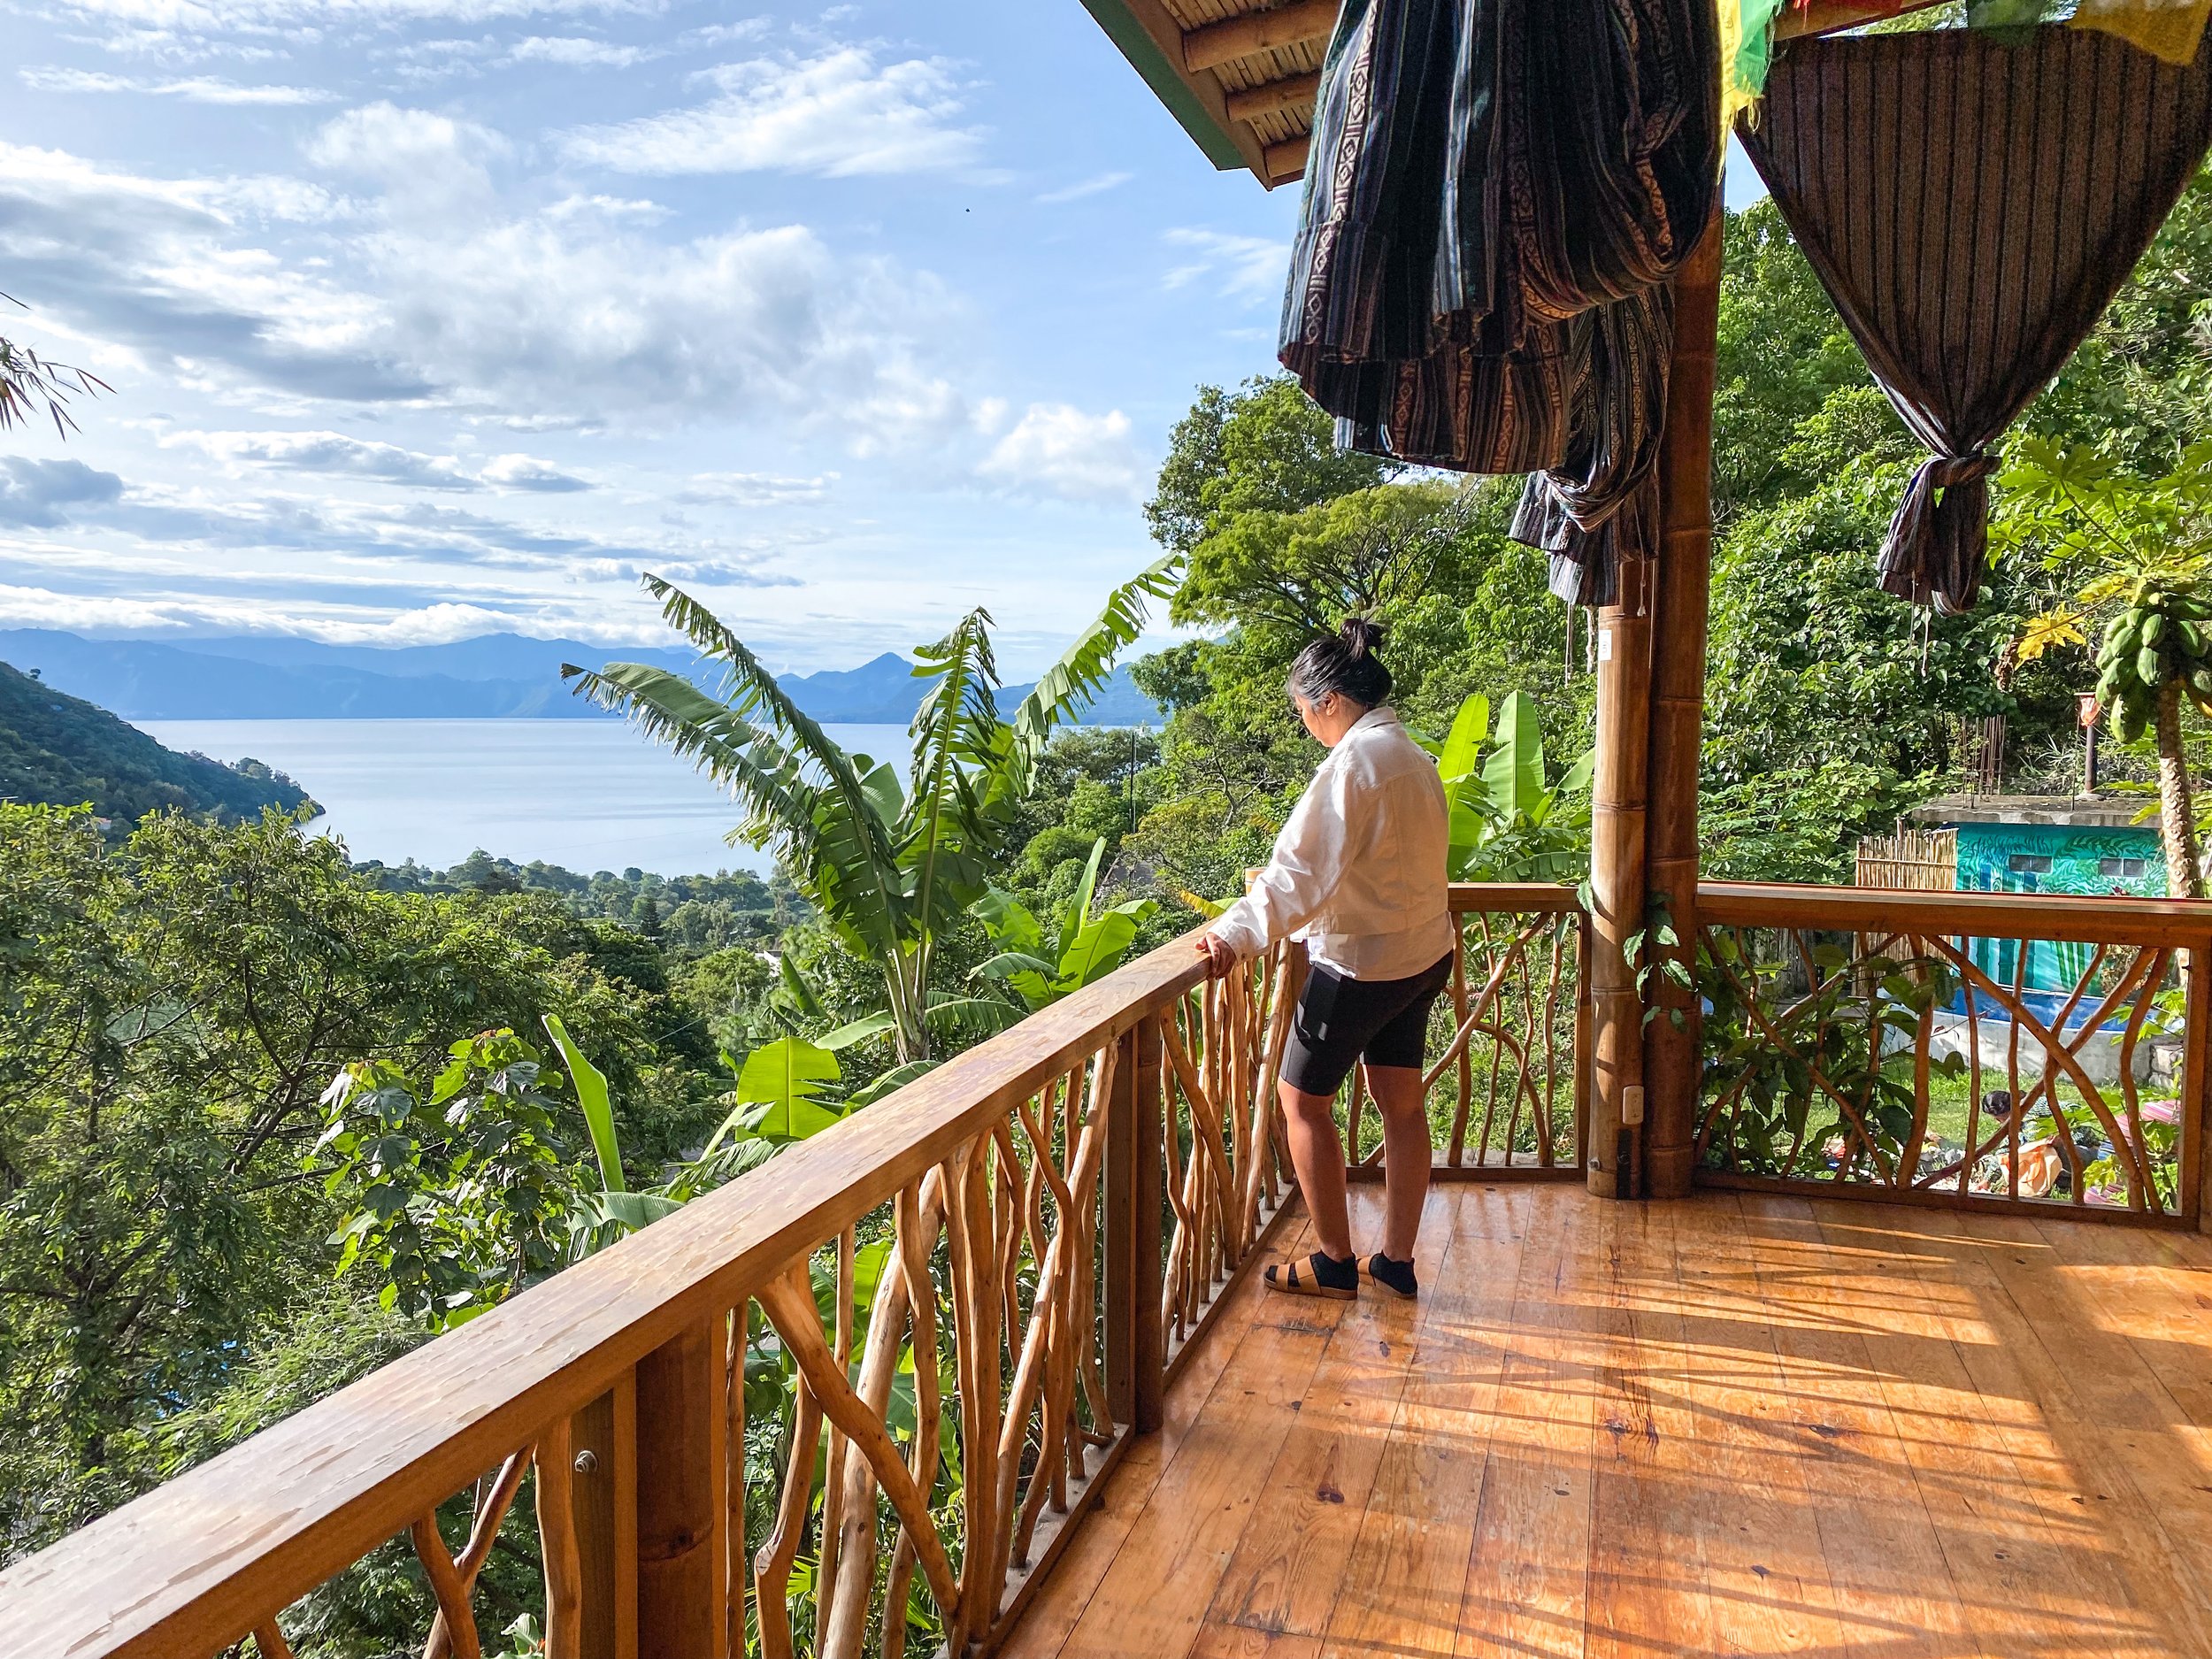 7 Reasons to Experience a Yoga Retreat in Guatemala